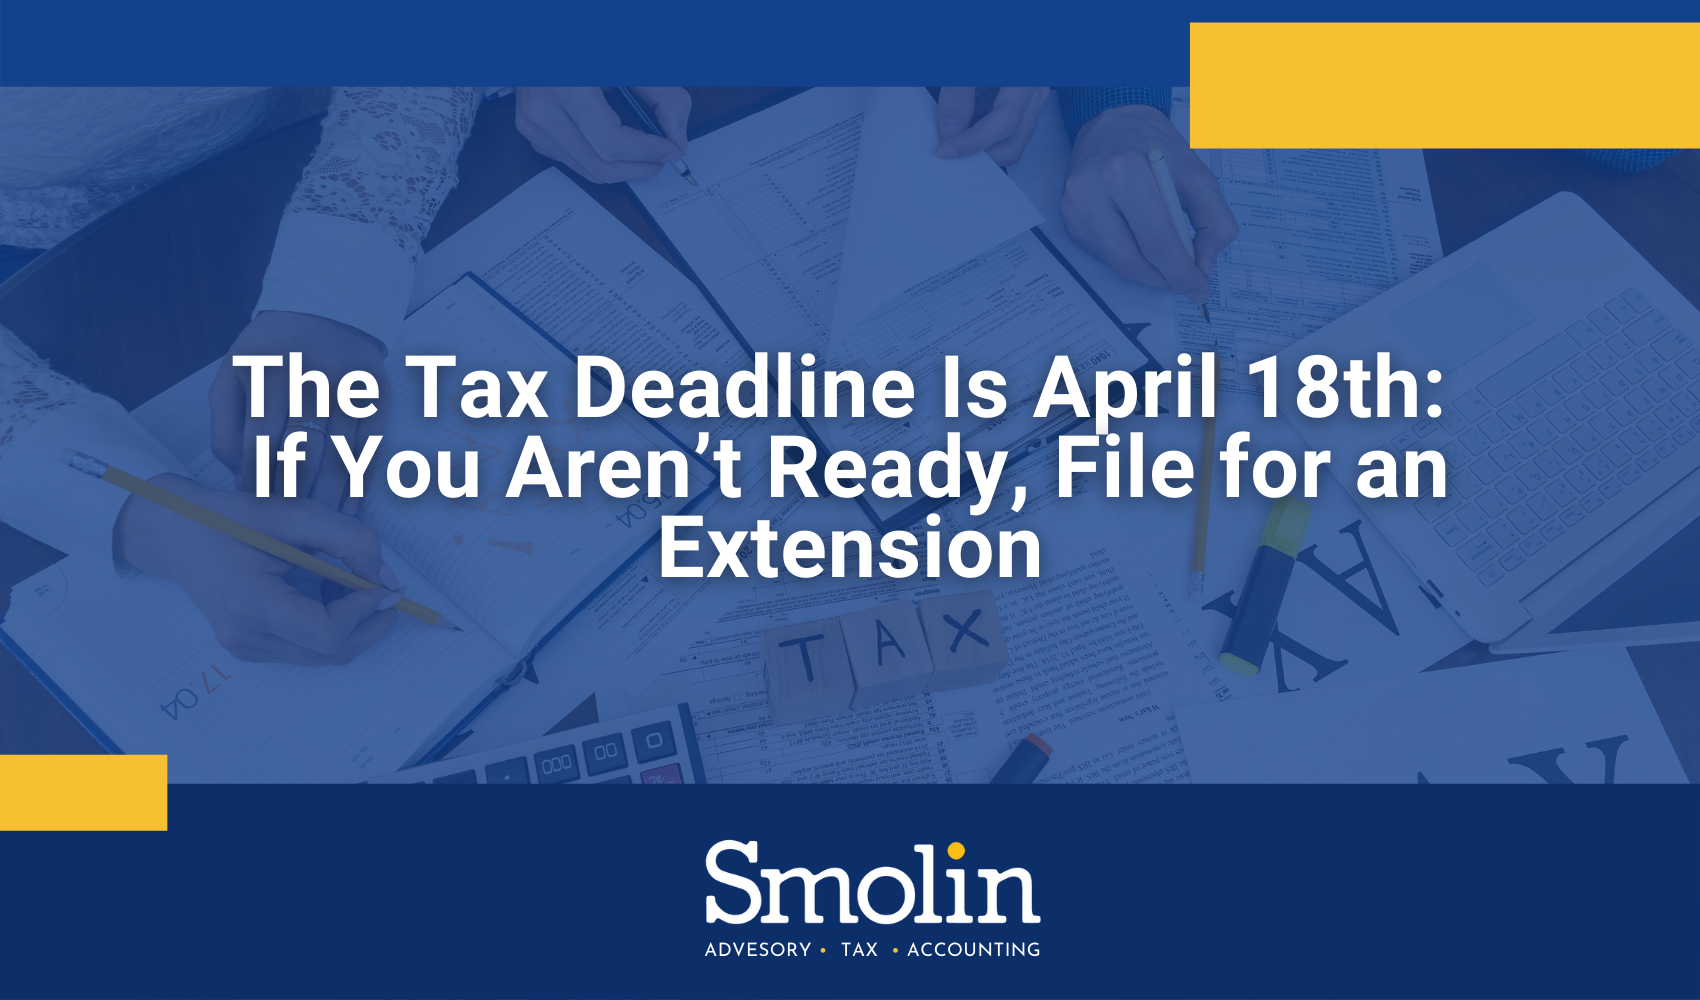 The Tax Deadline Is April 18th If You Aren’t Ready, File for an Extension